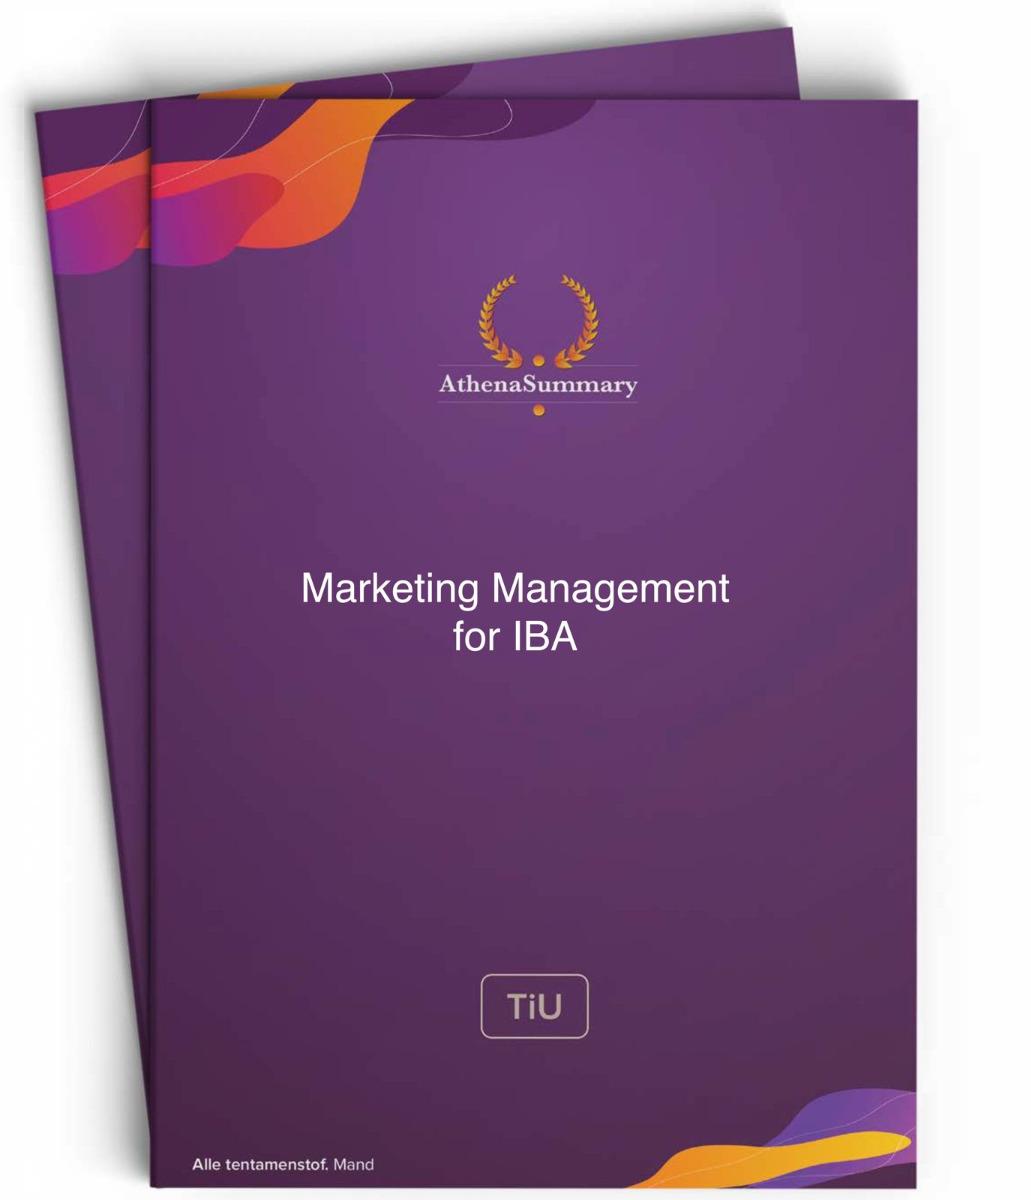 Literature and Lecture Summary: Marketing Management for IBA